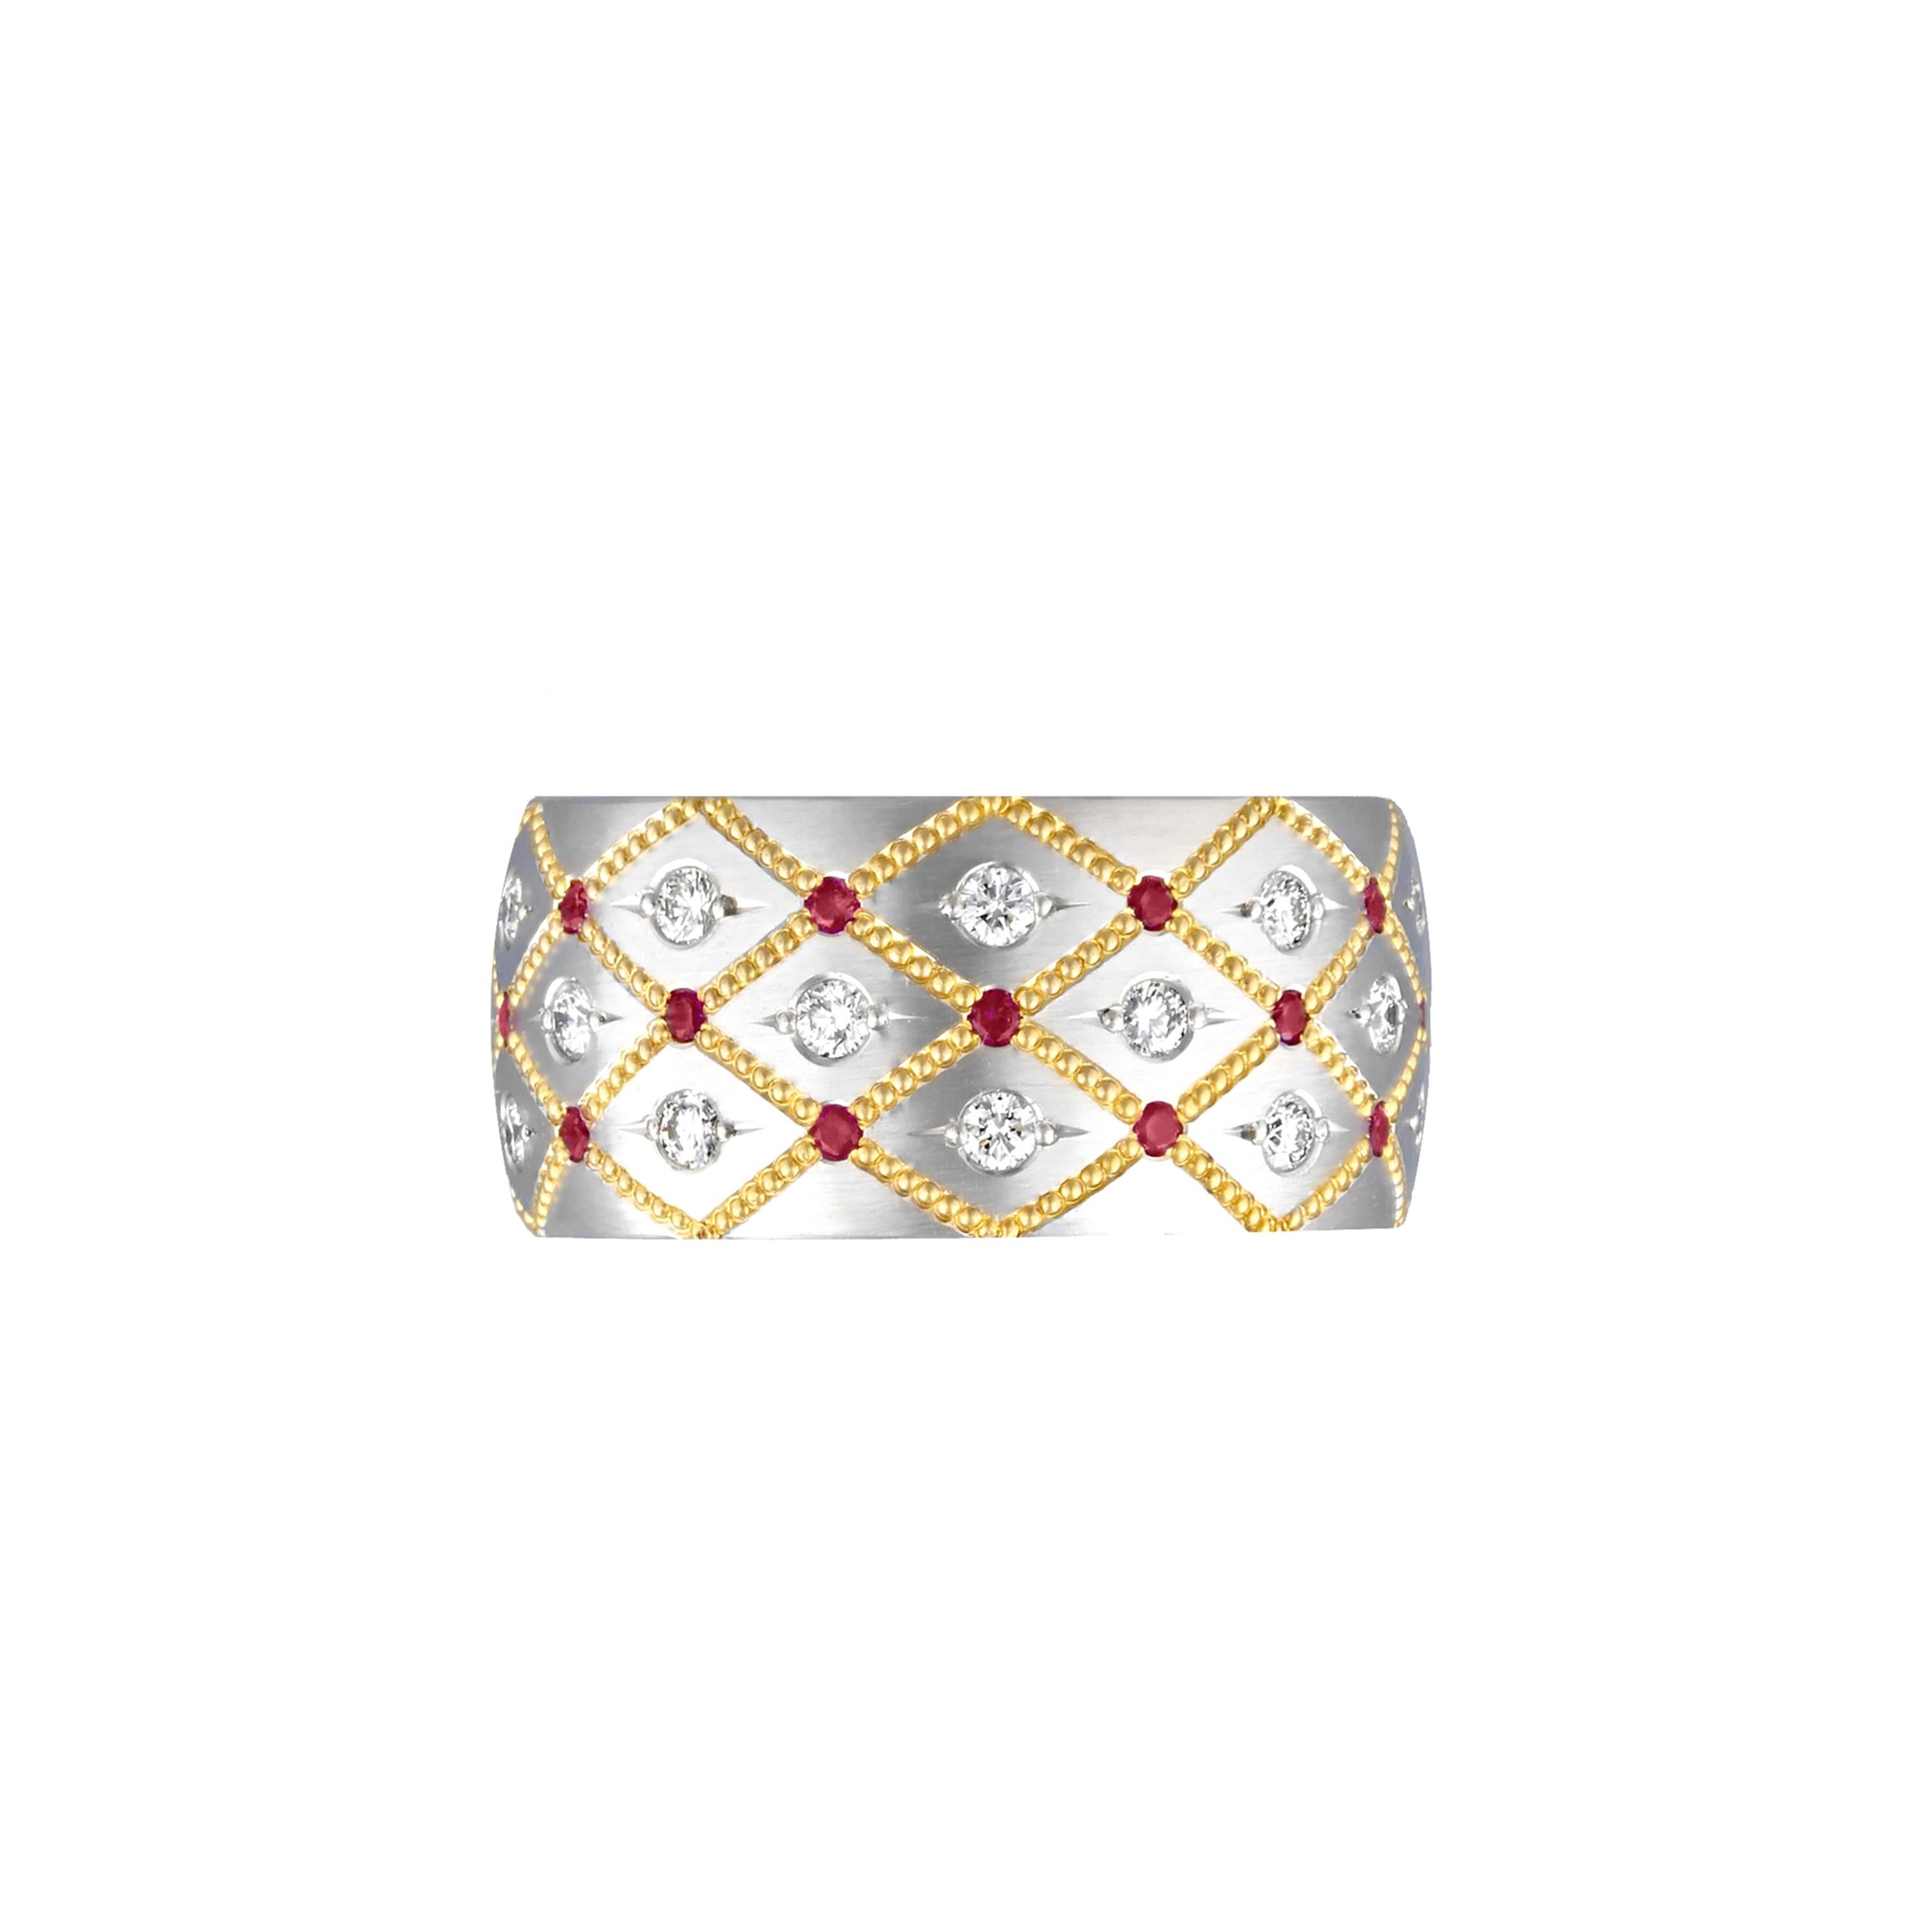 One of the most iconic Zoltan David pieces - the Ruby Duchess band. Made in Platinum with 24K Gold shaped inlay, .27 ct. of Rubies, .54 ct. total of DEF color/ Internally Flawless to VVS clarity Ideal cut Diamonds. 24K Gold inner sleeve. 10 mm wide.